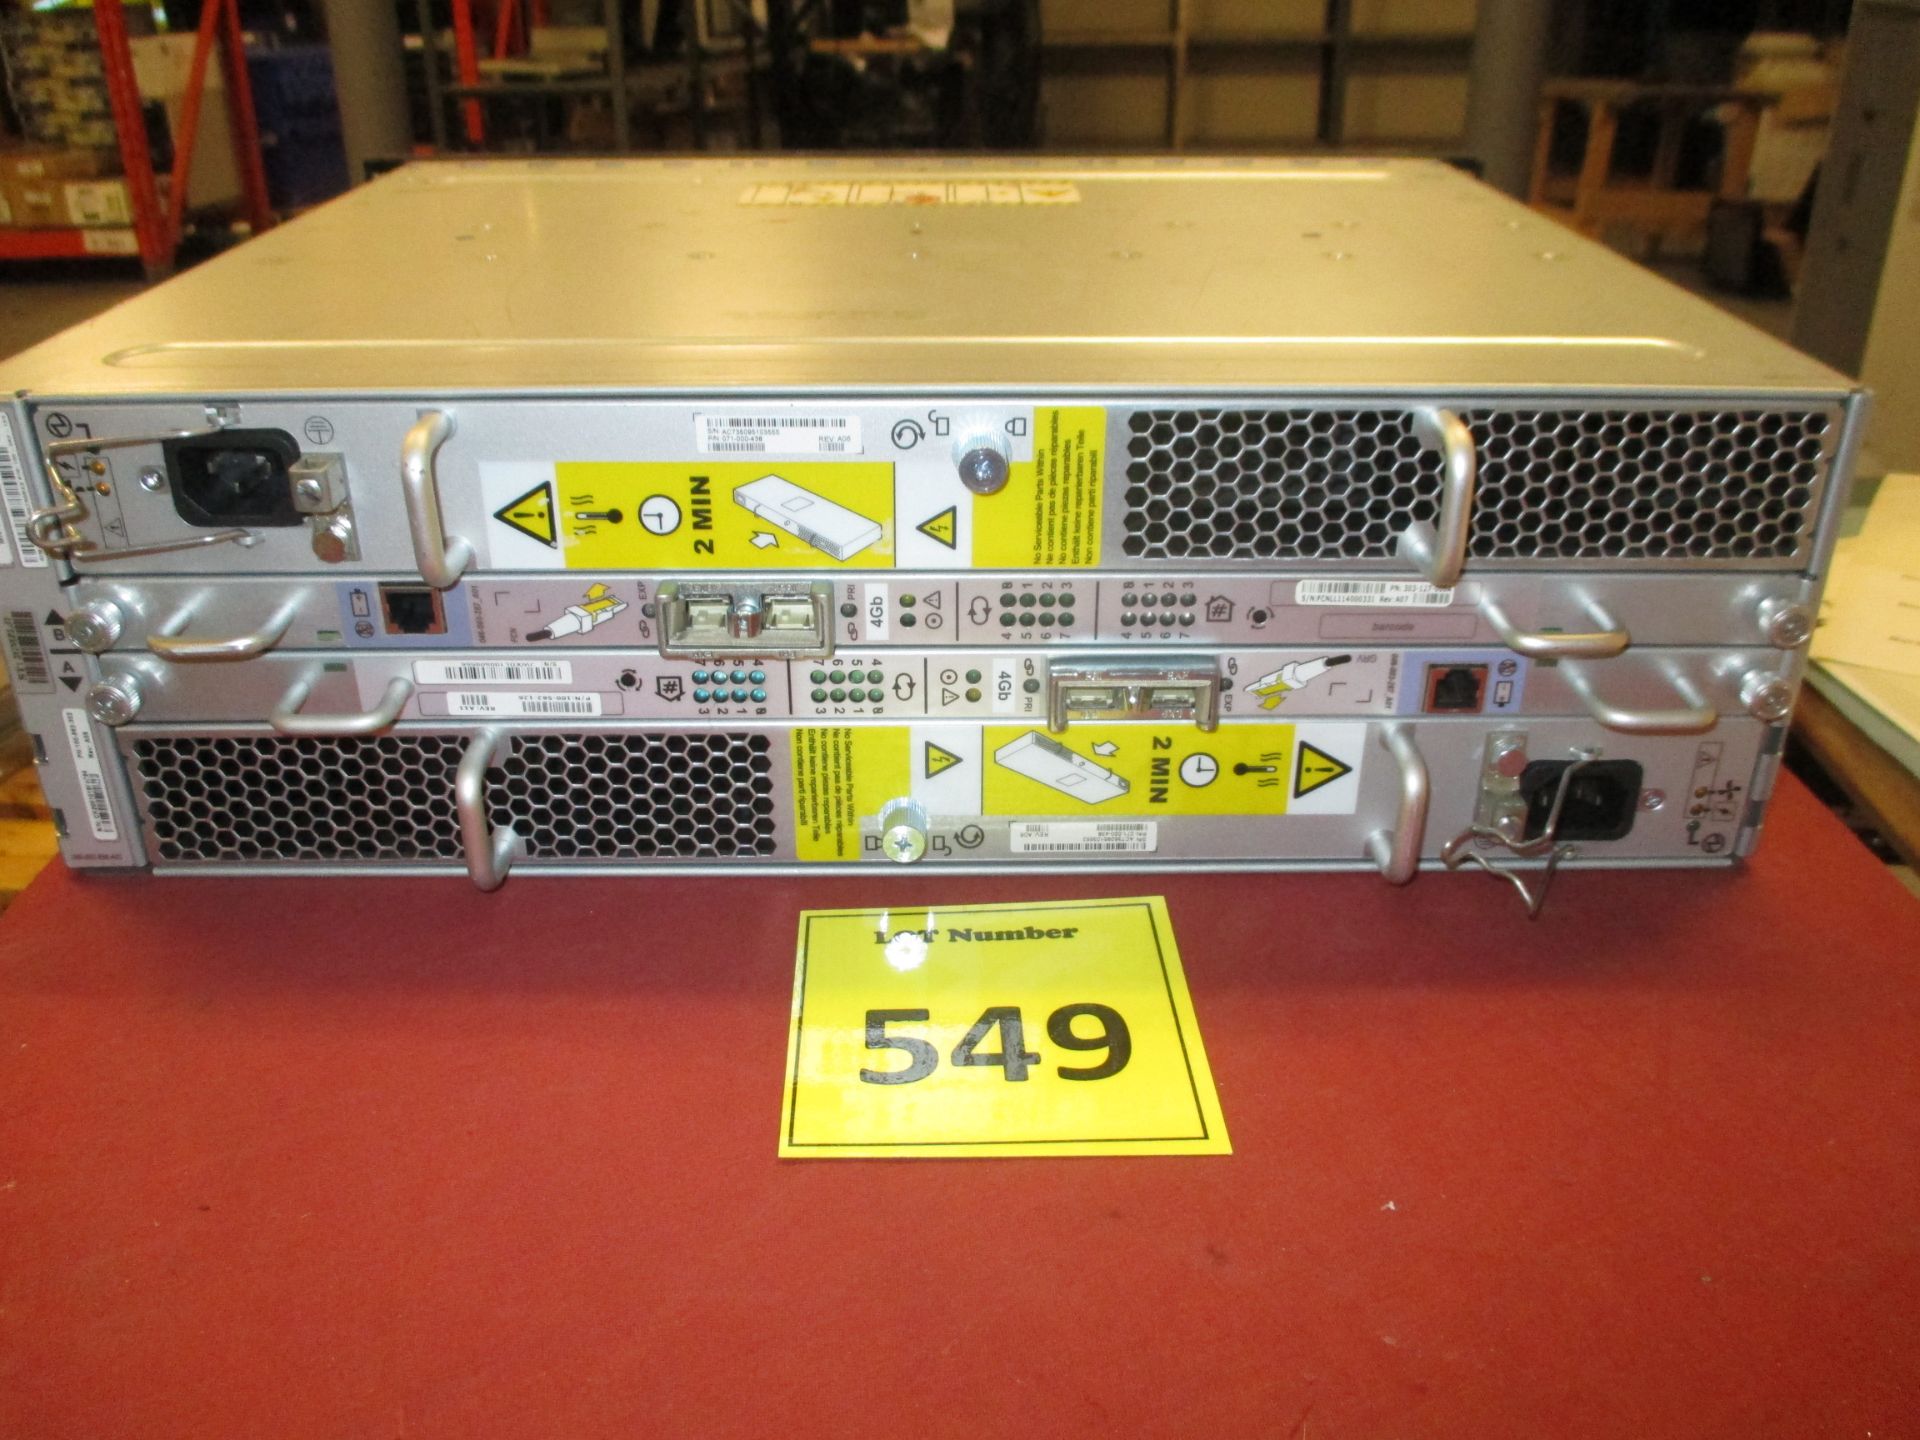 Dell EMC Drive array KTN-STL4 - 2 x 4GB Controllers Fibre Channel FC & 2 x PSU. COMPLETE WITH - Image 3 of 3